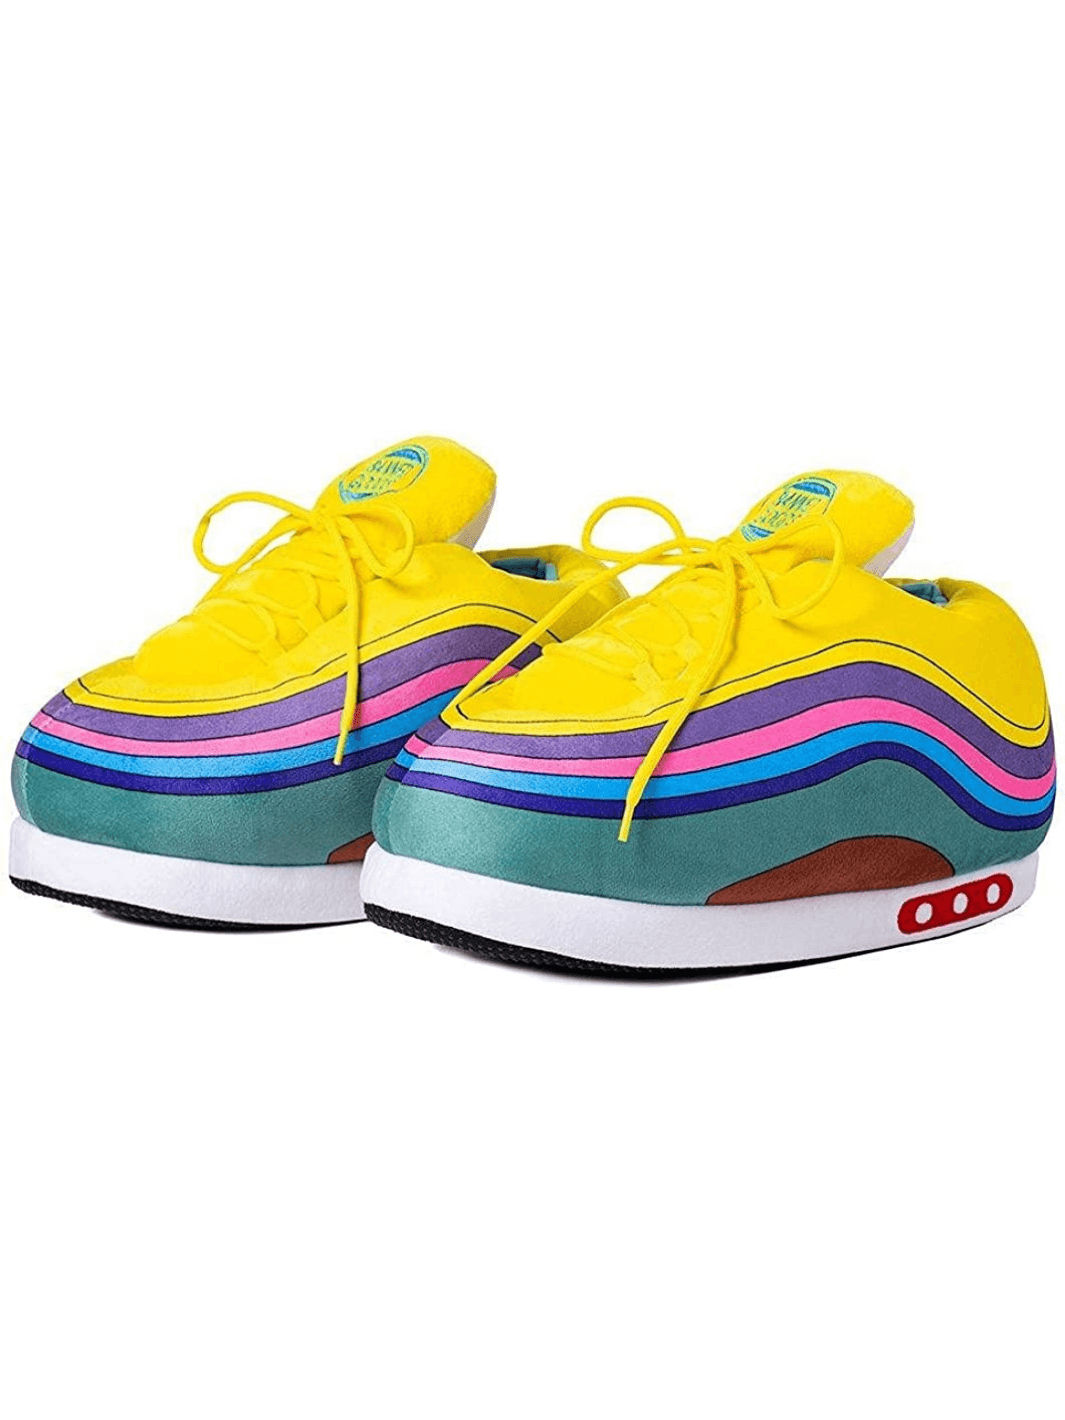 RAINBOW PUFF - Puffsneakers RAINBOW PUFF puffsneakers Puffsneakers  899.00 